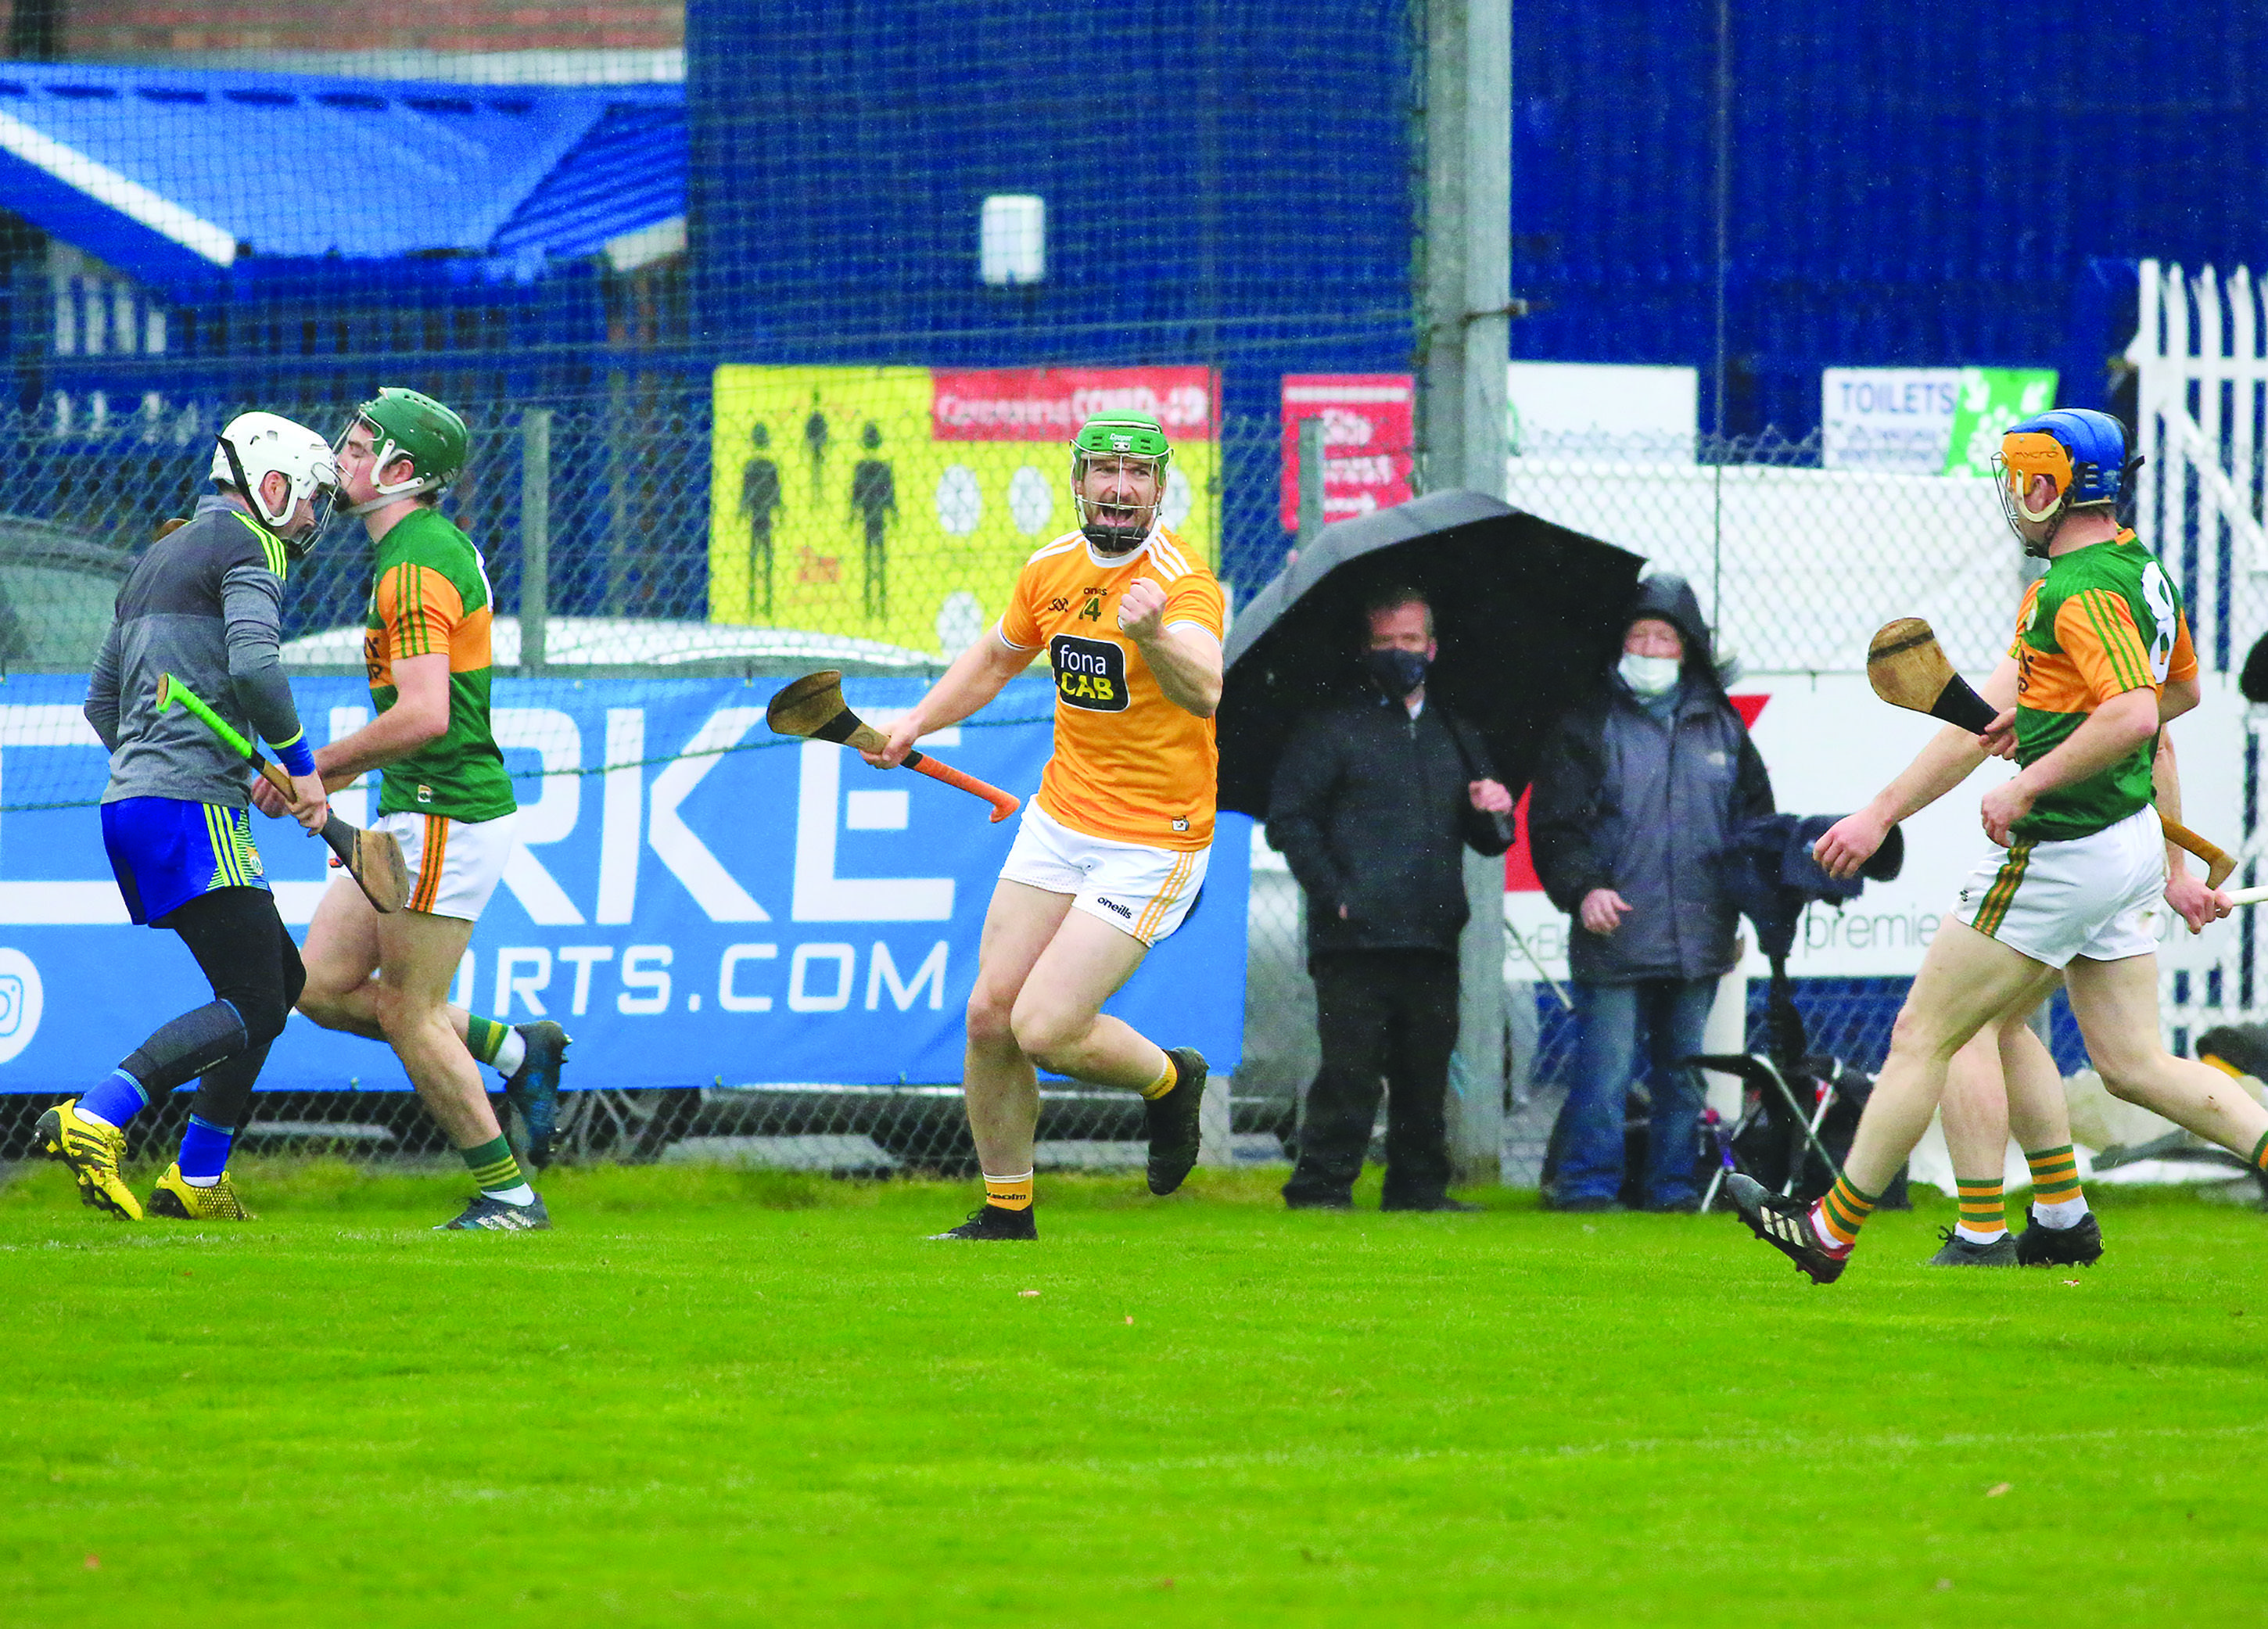 Conor McCann celebrates after finding the net against Kerry last month, which was the sixth consecutive game the Creggan man had struck for goal